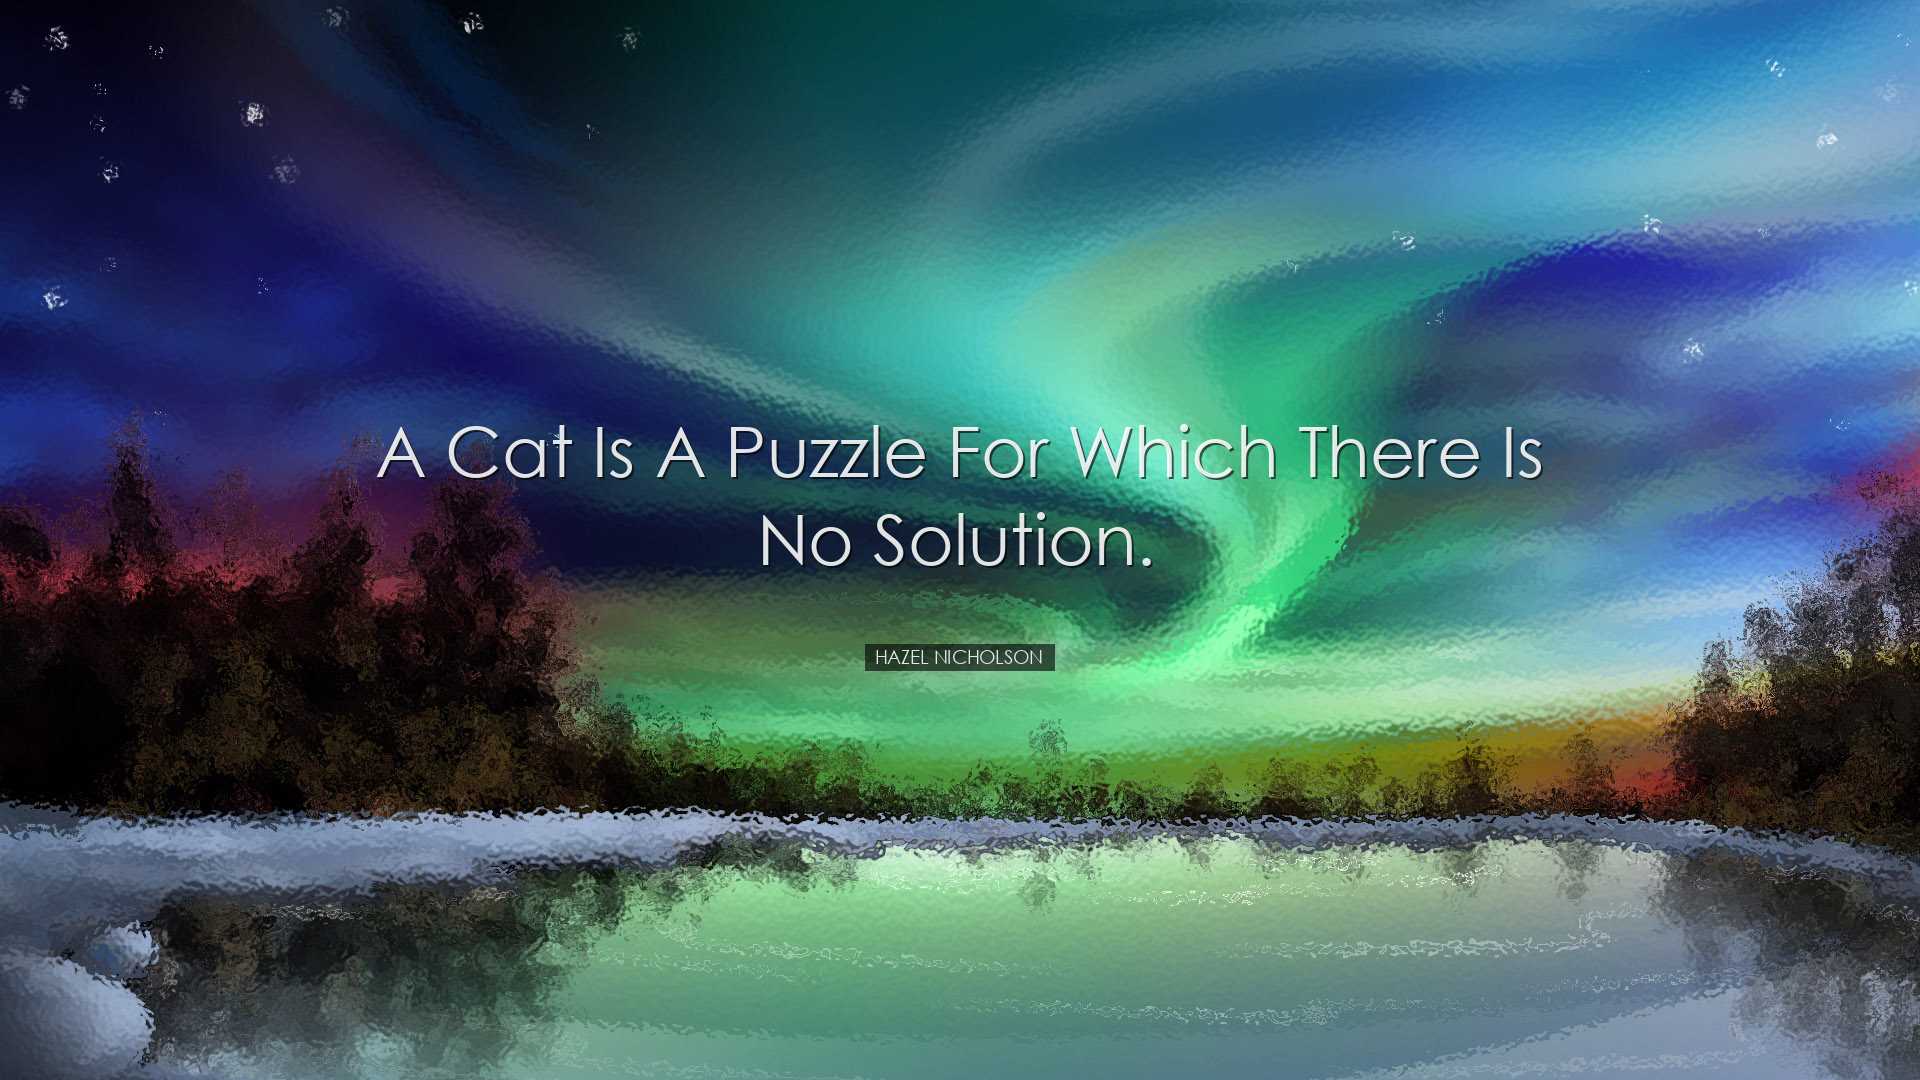 A cat is a puzzle for which there is no solution. - Hazel Nicholso